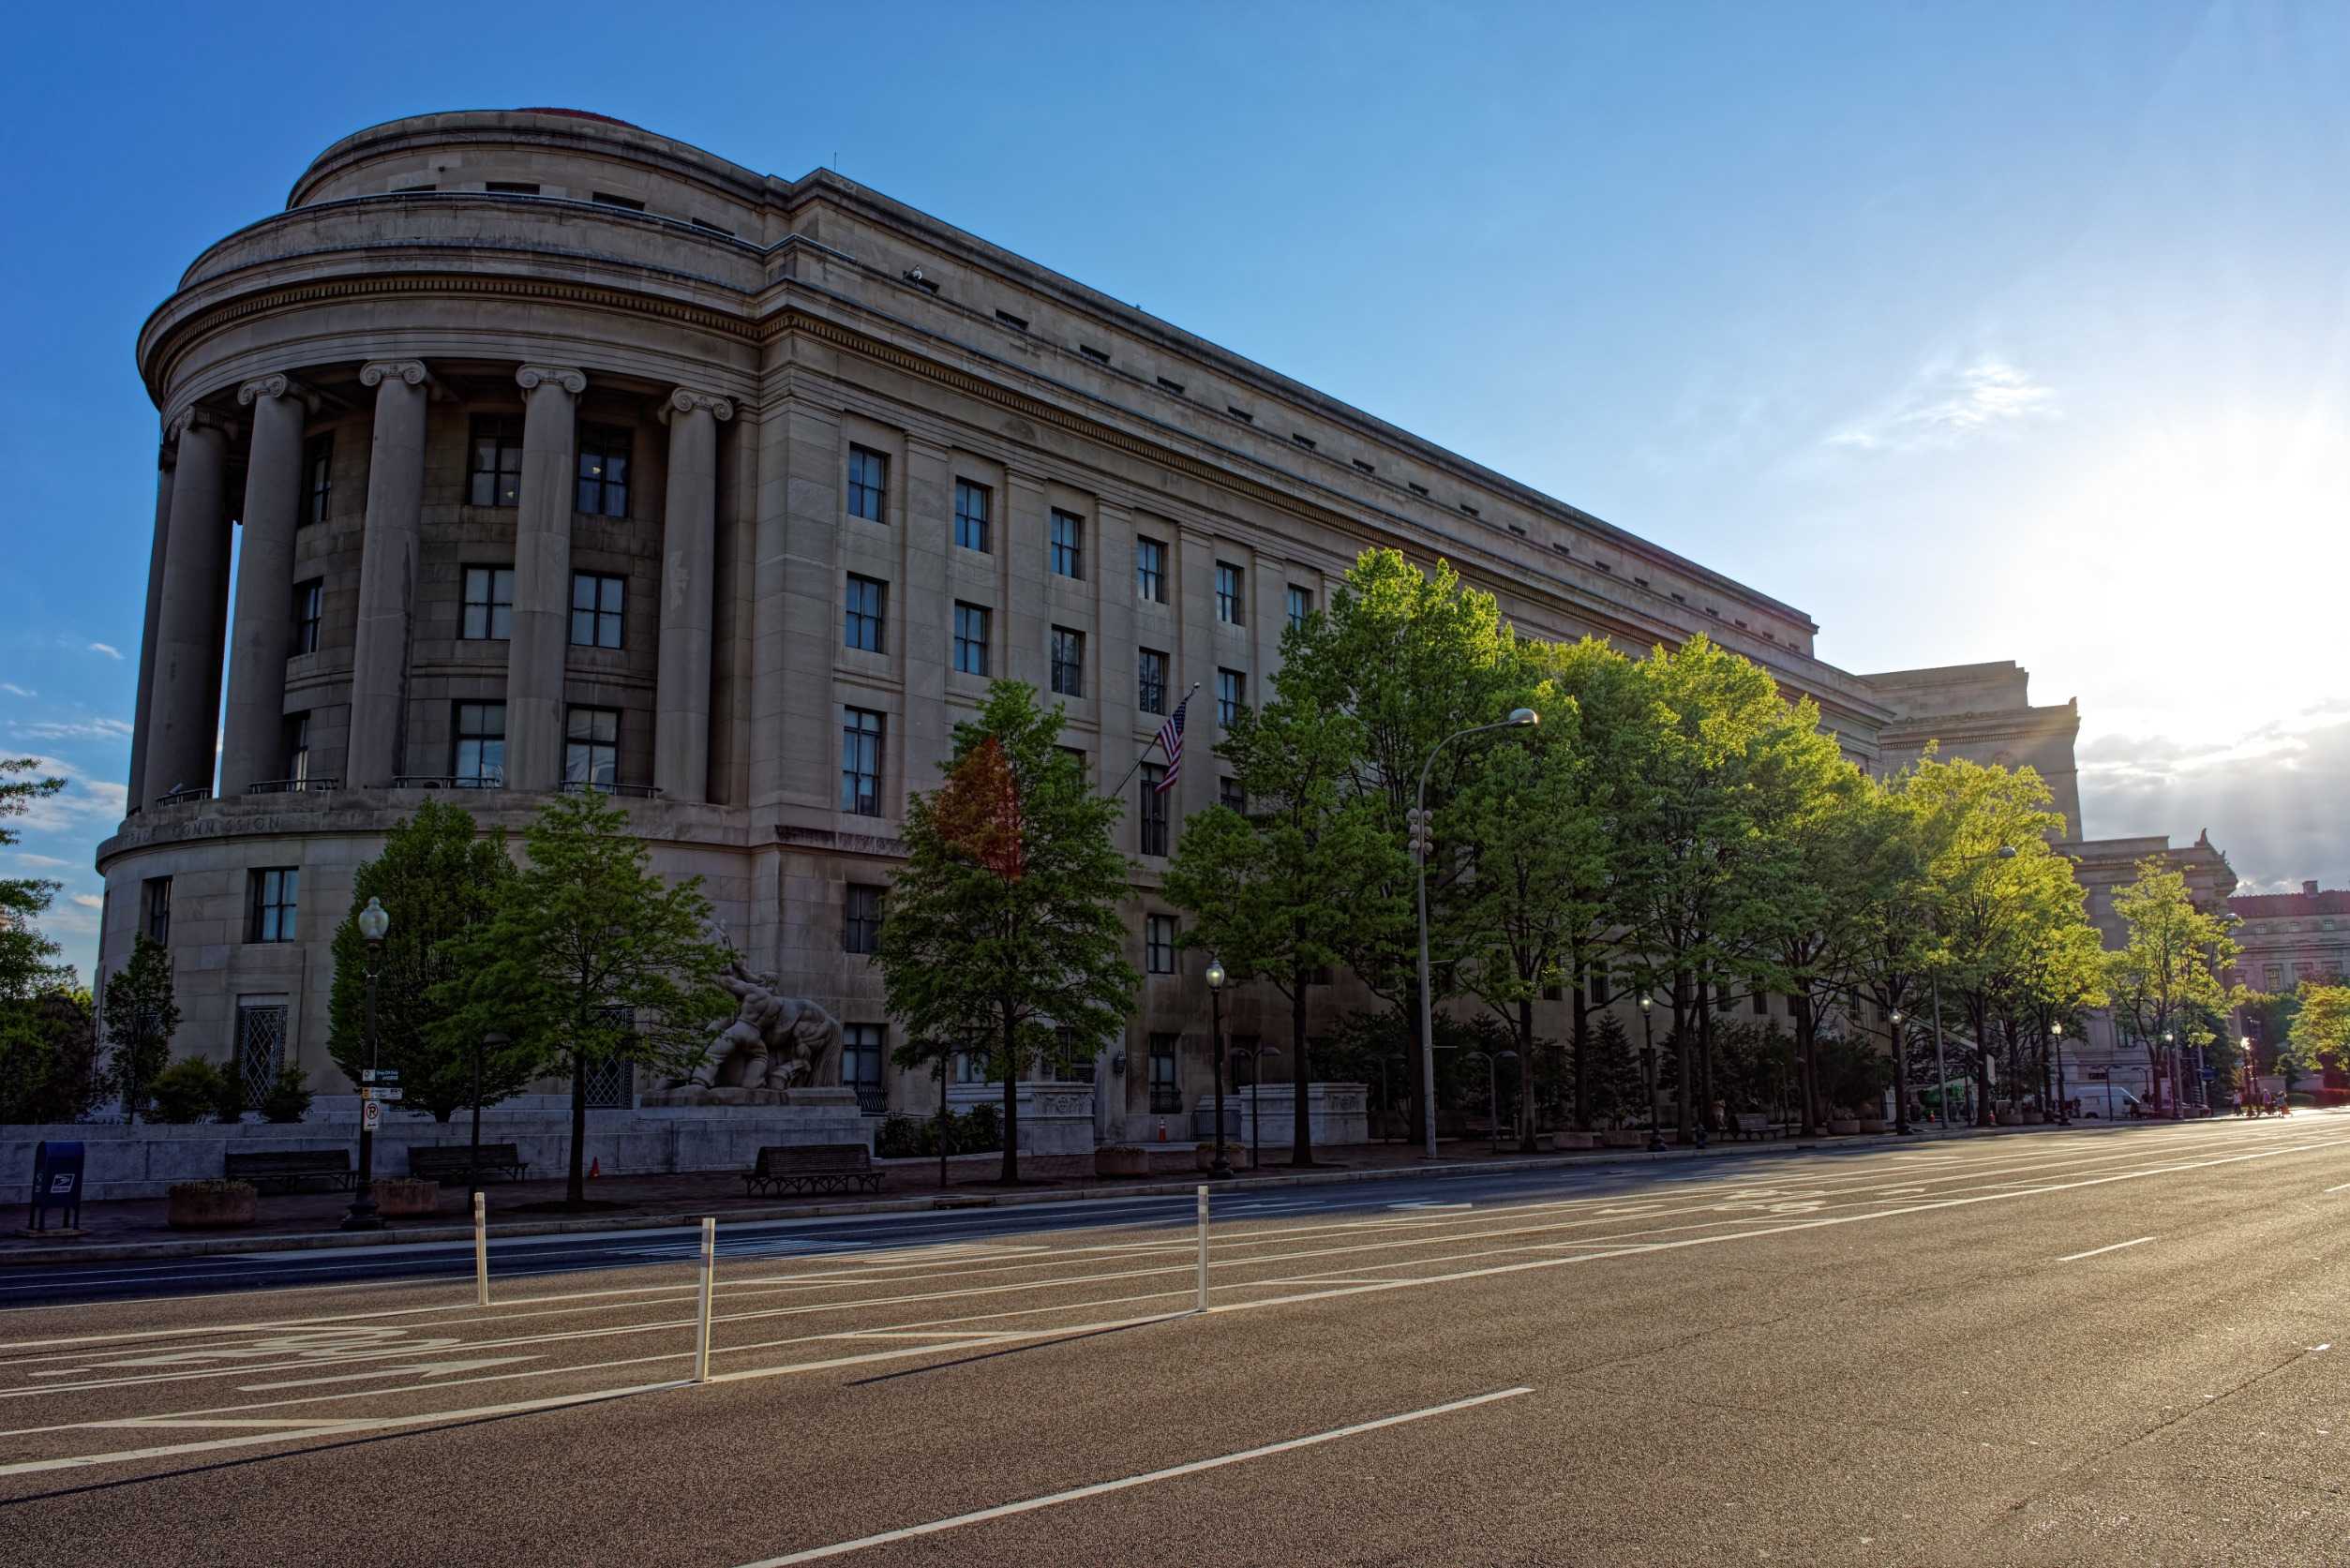 Stay Ahead of the Curve: New FTC Safeguards Demand Your Attention